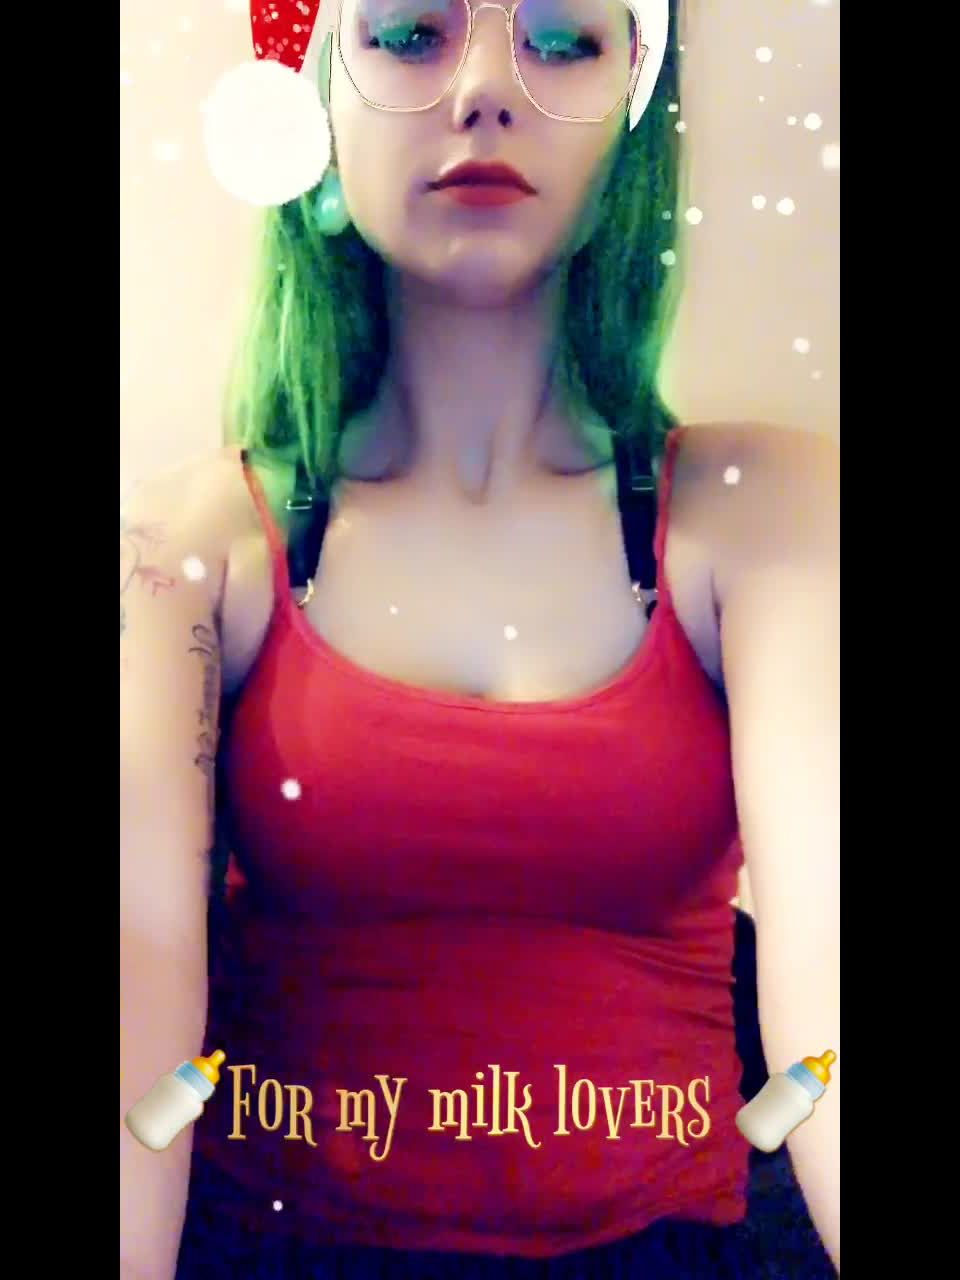 Skylarbonez () - late lac video for my milk lovers 06-01-2020